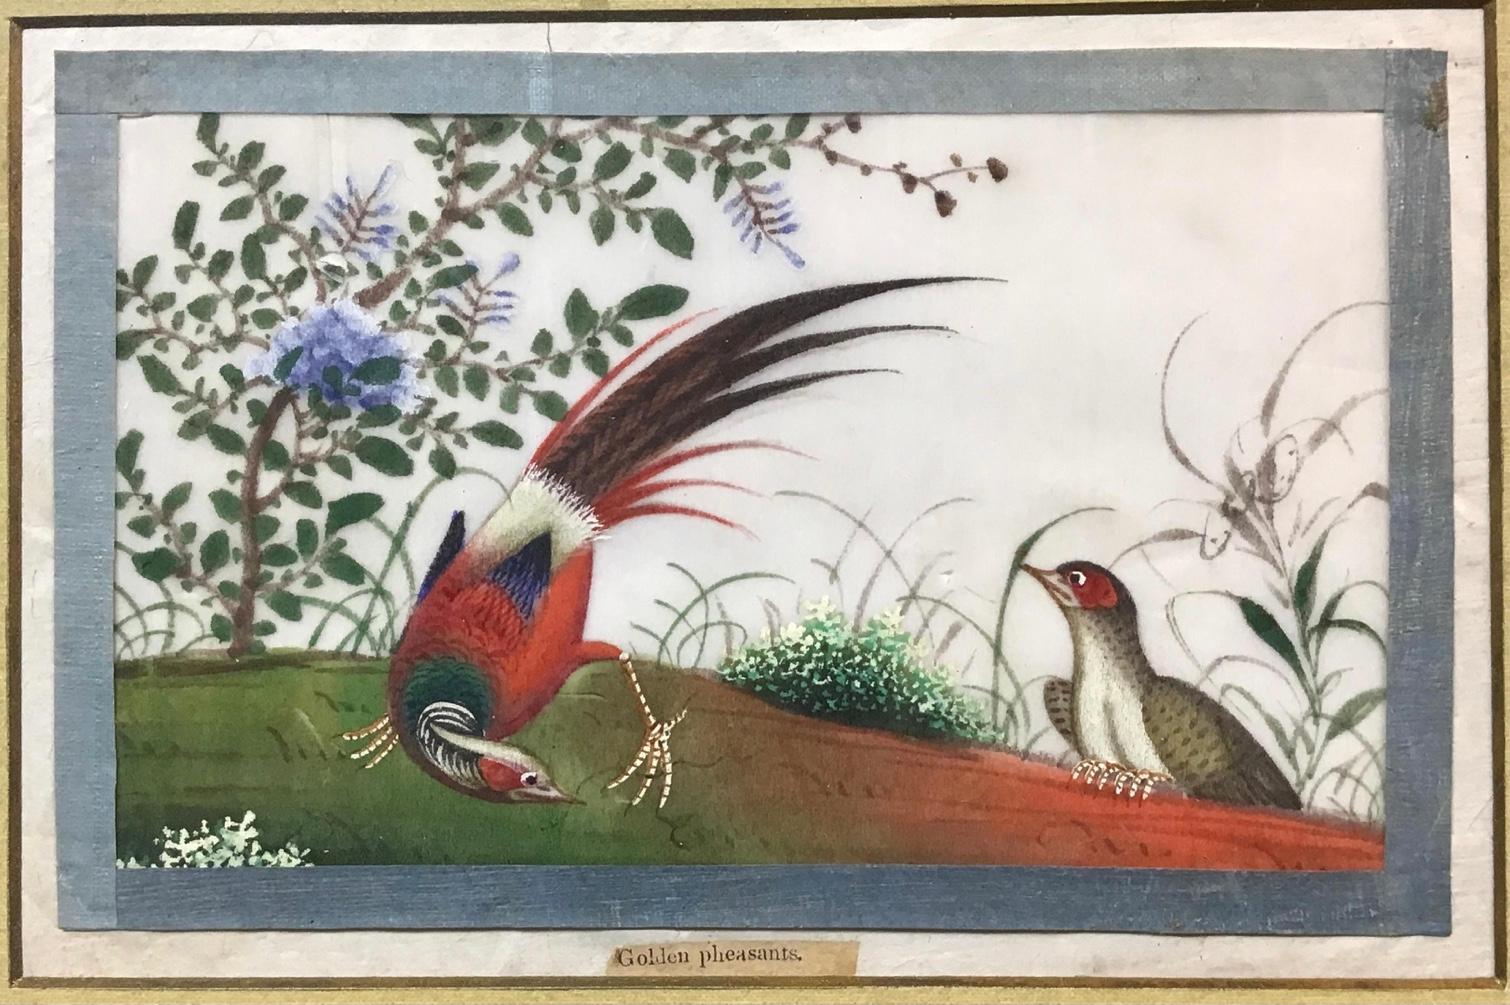 Fantastic framed and matted antique Chinese painting of birds. Painted on pith paper with gouache in bold colors in typical style. Titled on the bottom 